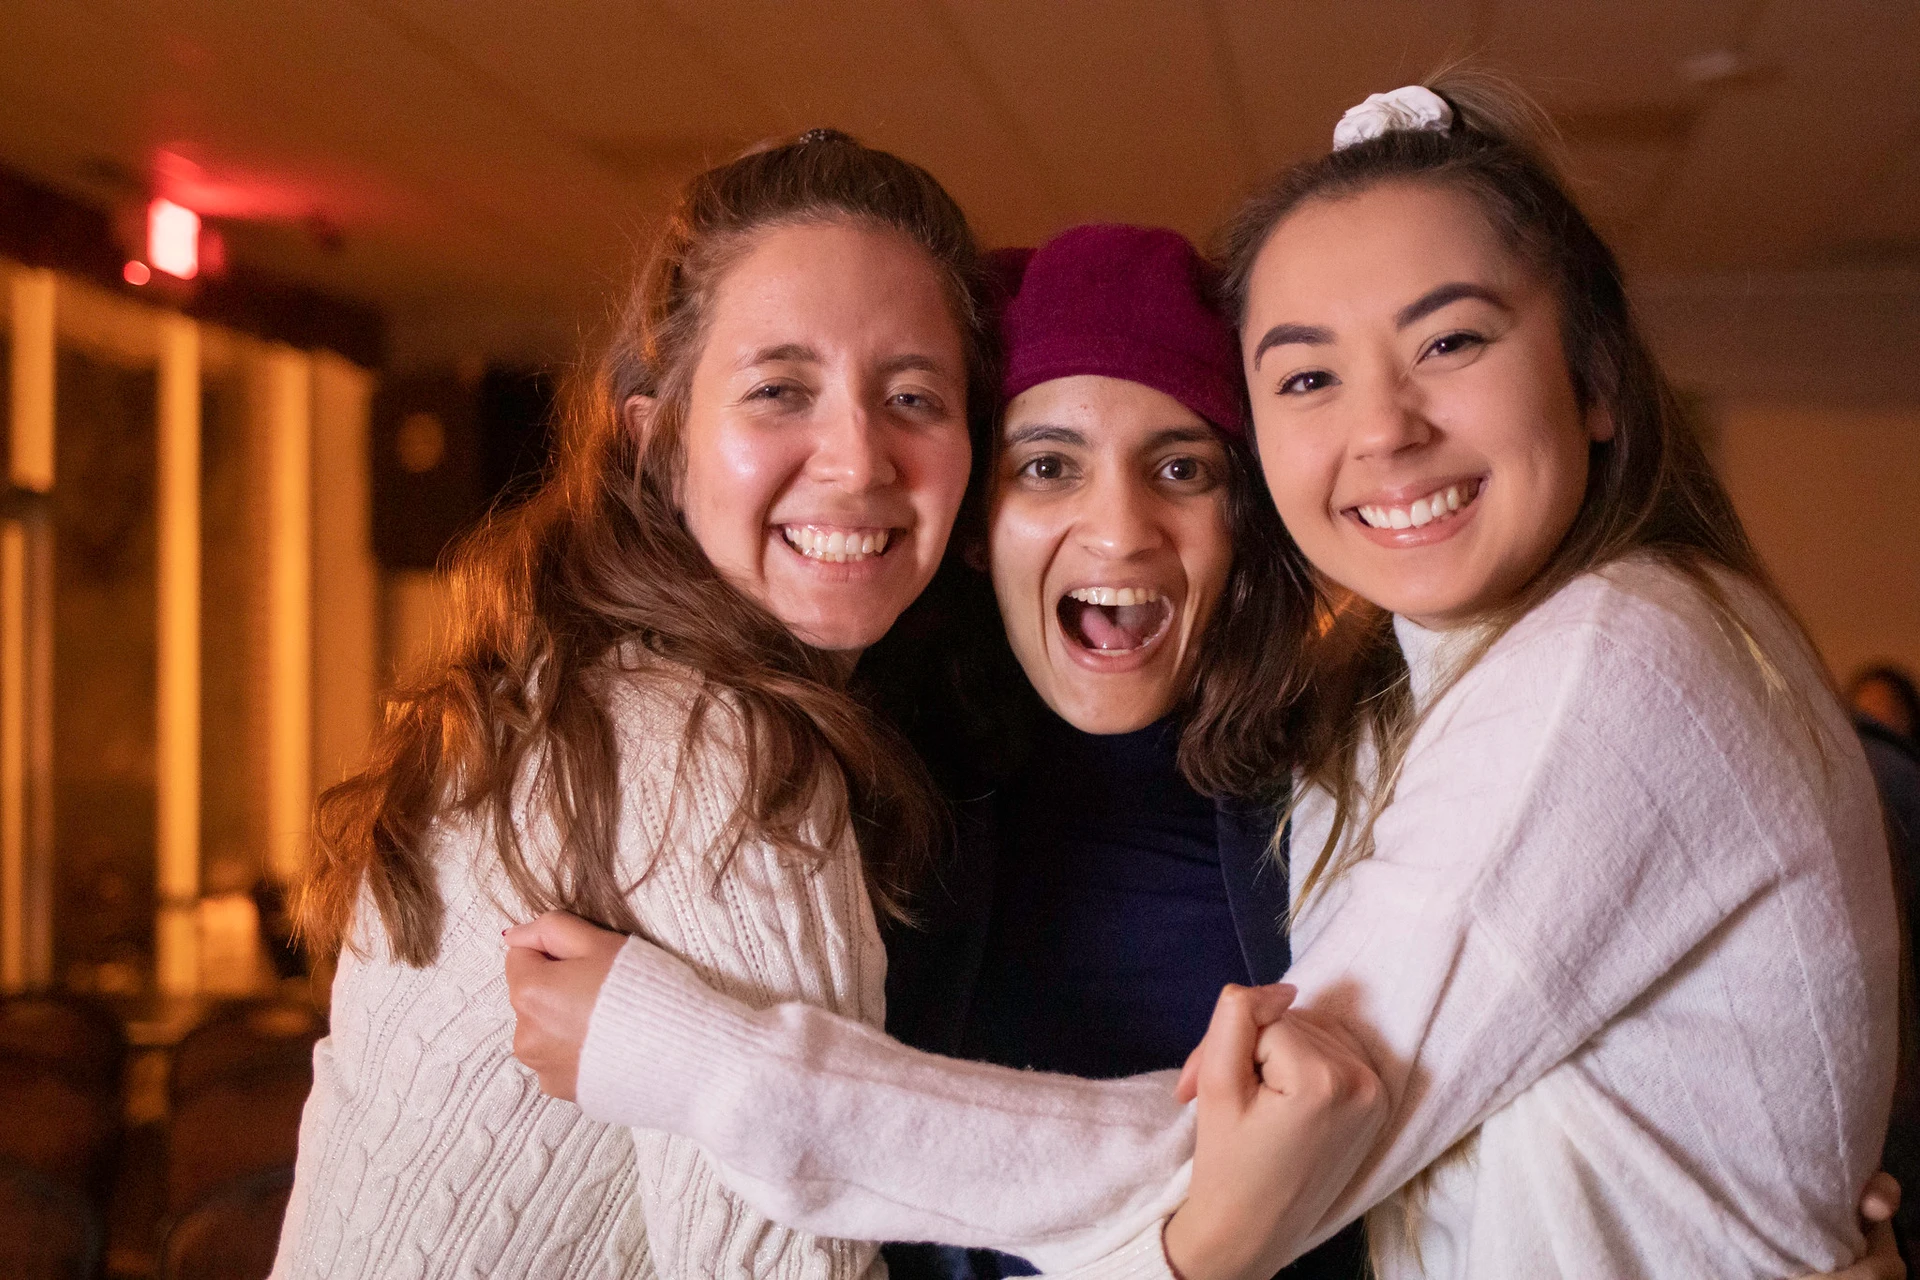 Three female friends hug tightly and smile as they are dressed in long-sleeved sweaters